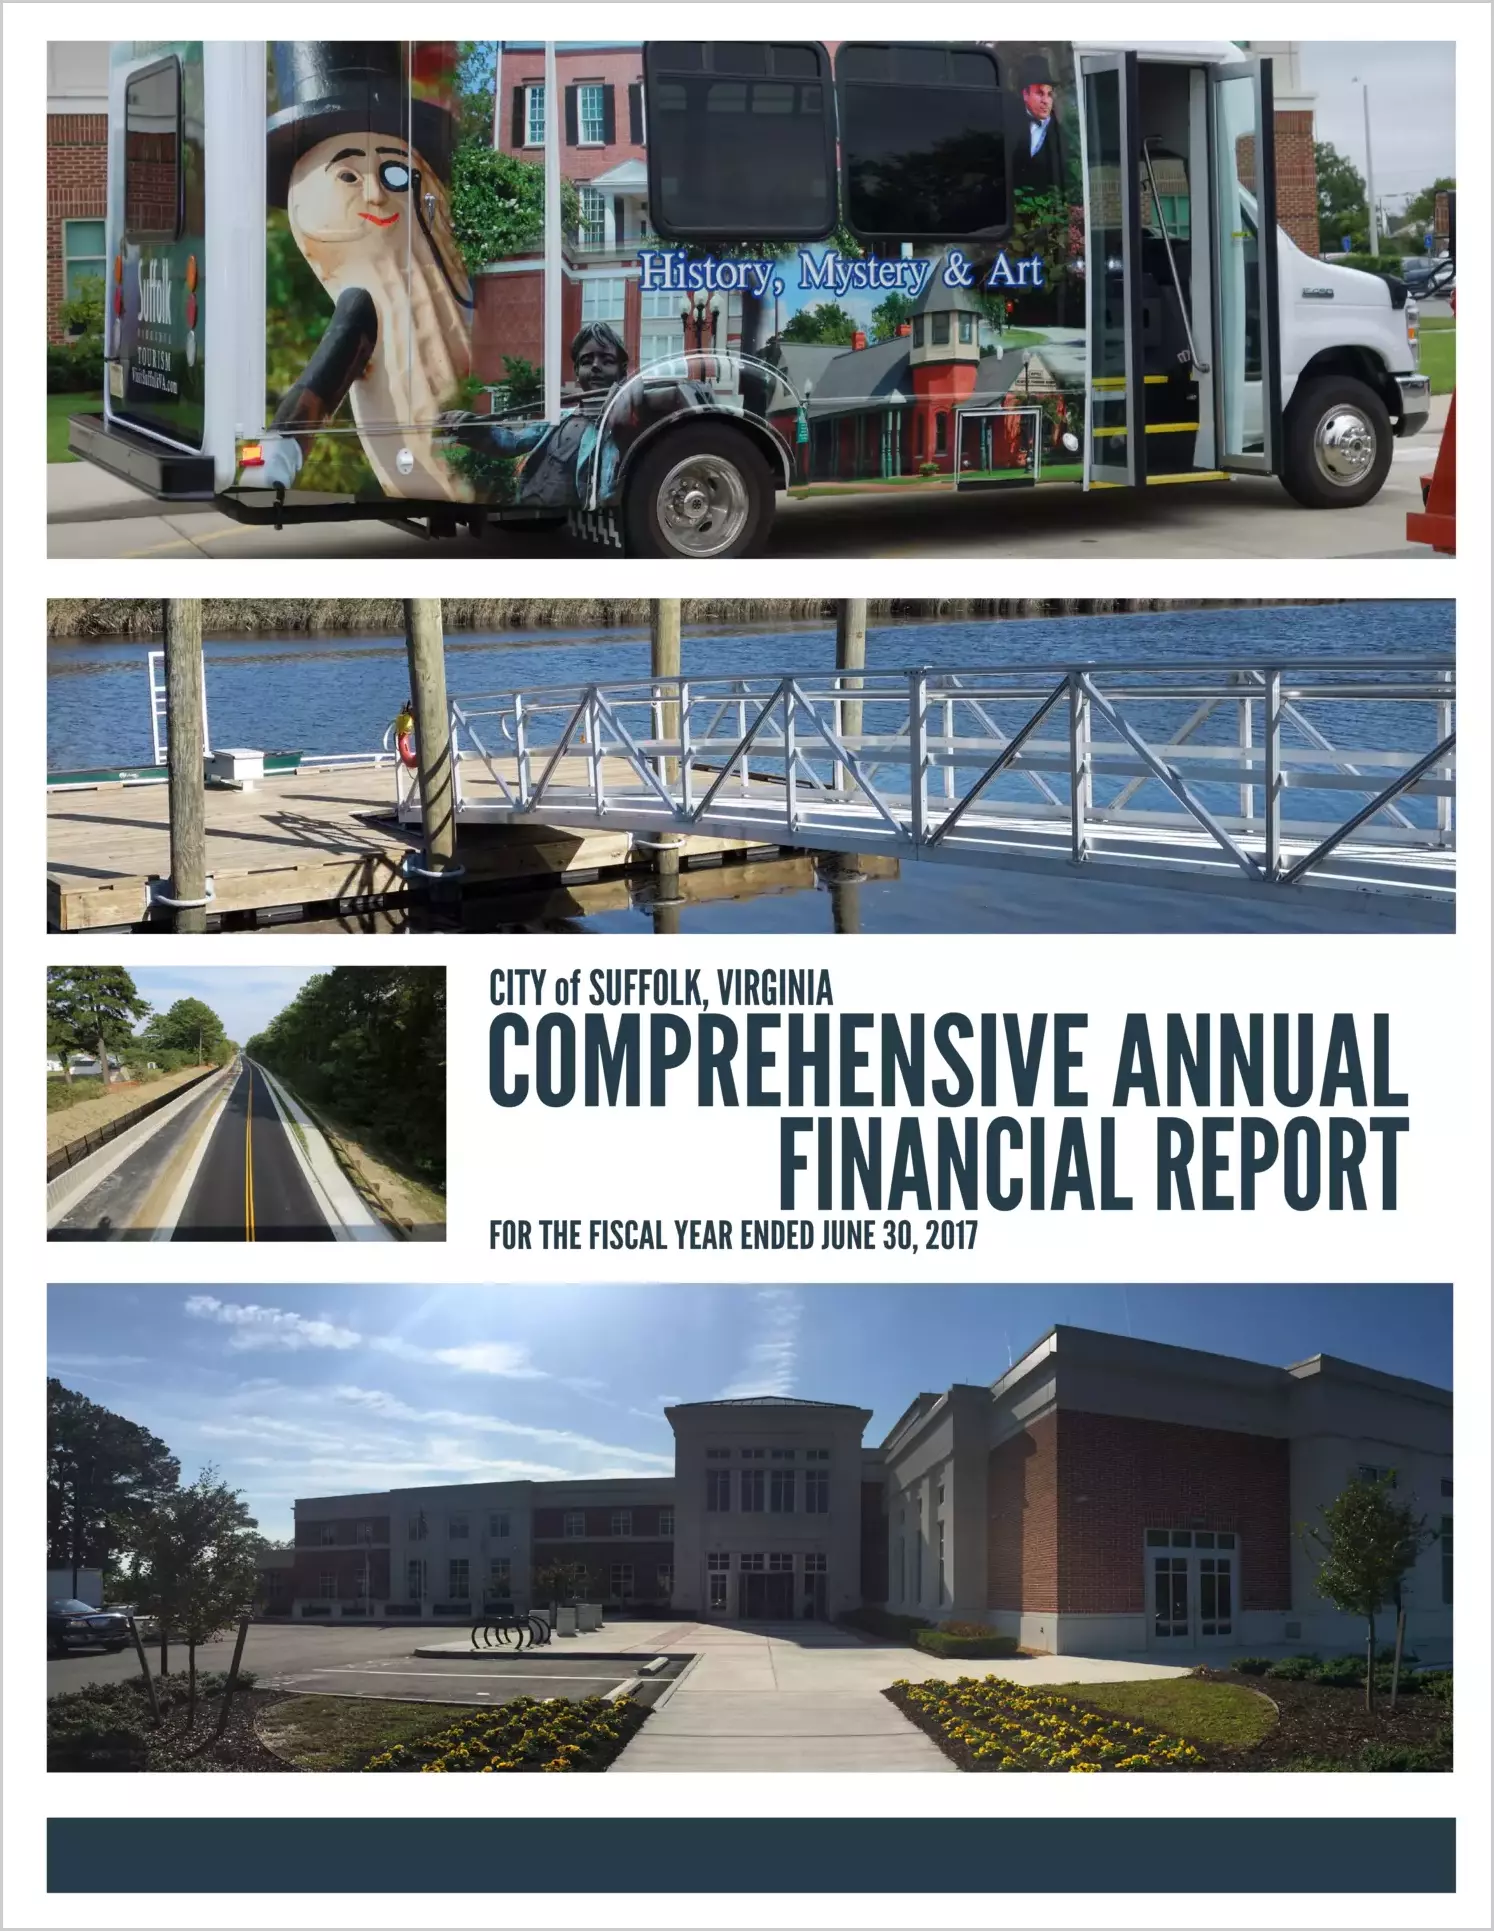 2017 Annual Financial Report for City of Suffolk